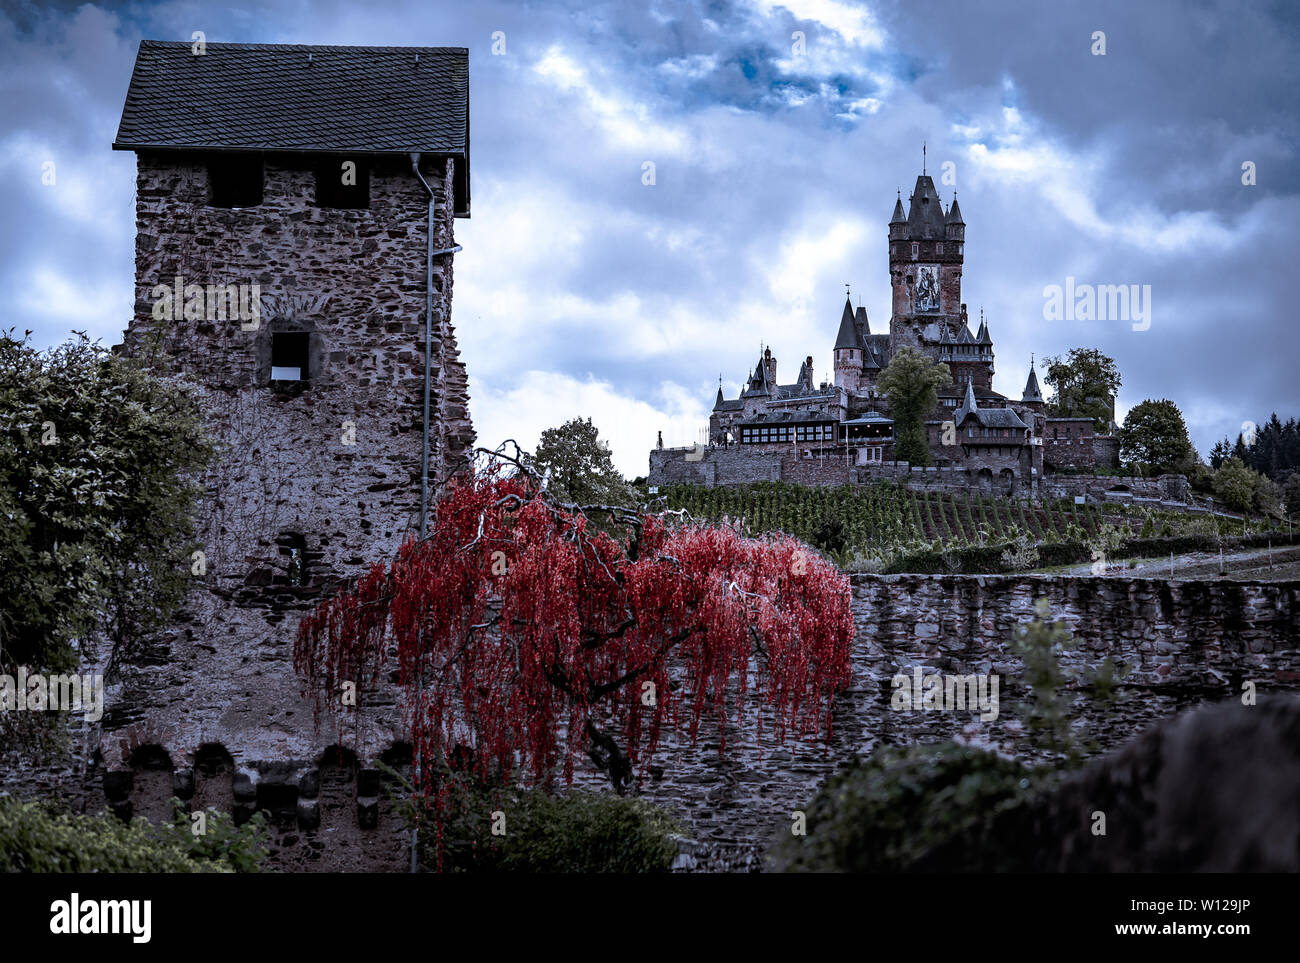 Dramatic fairytale castle on a hill with dark sky clouds and red tree. Stock Photo